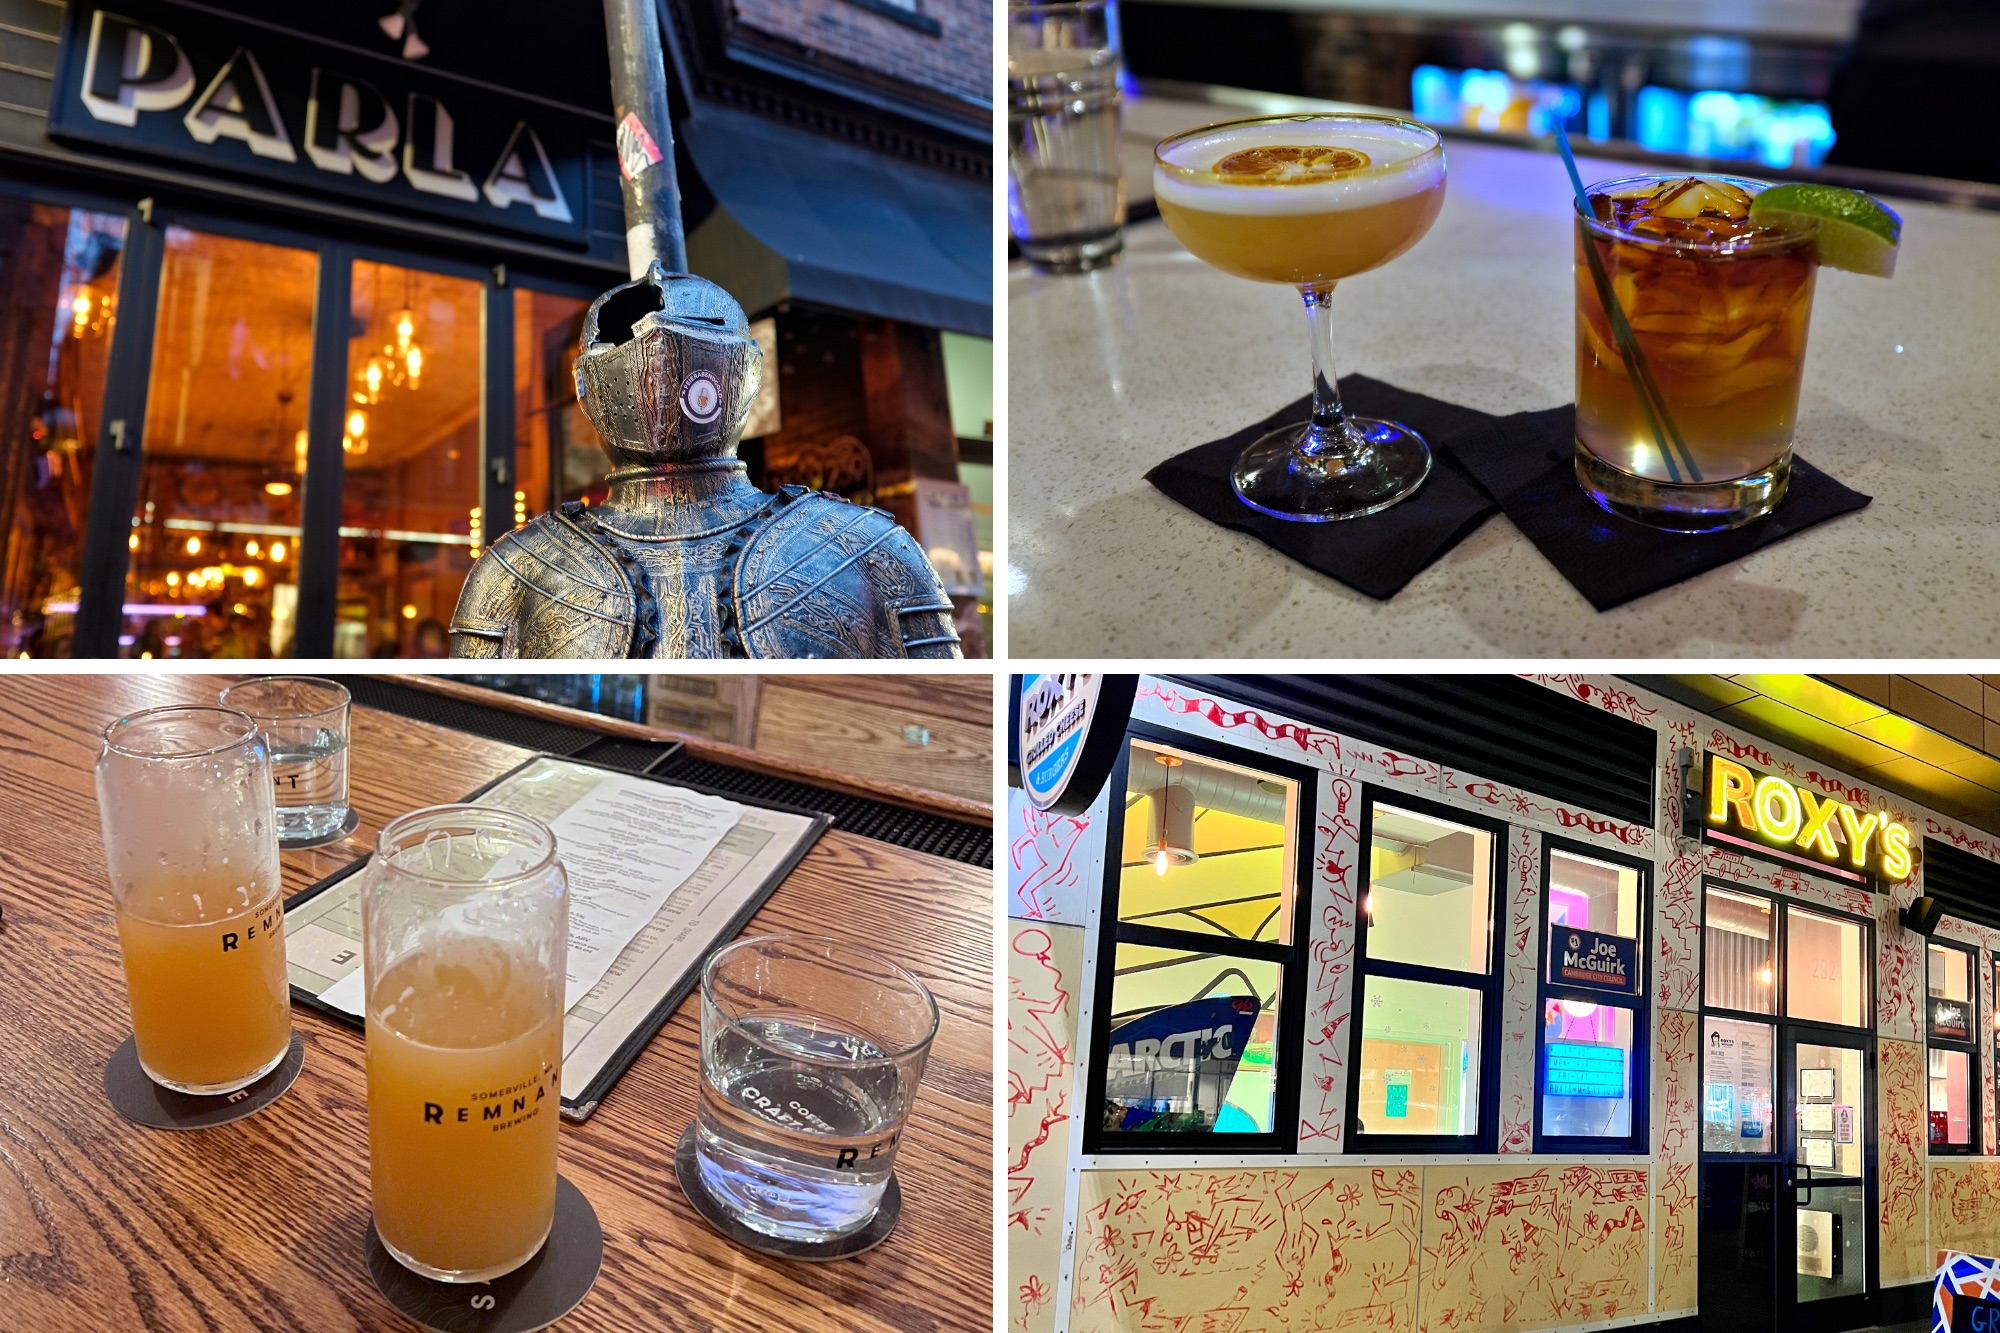 Exterior and beverages at four bars in Boston area